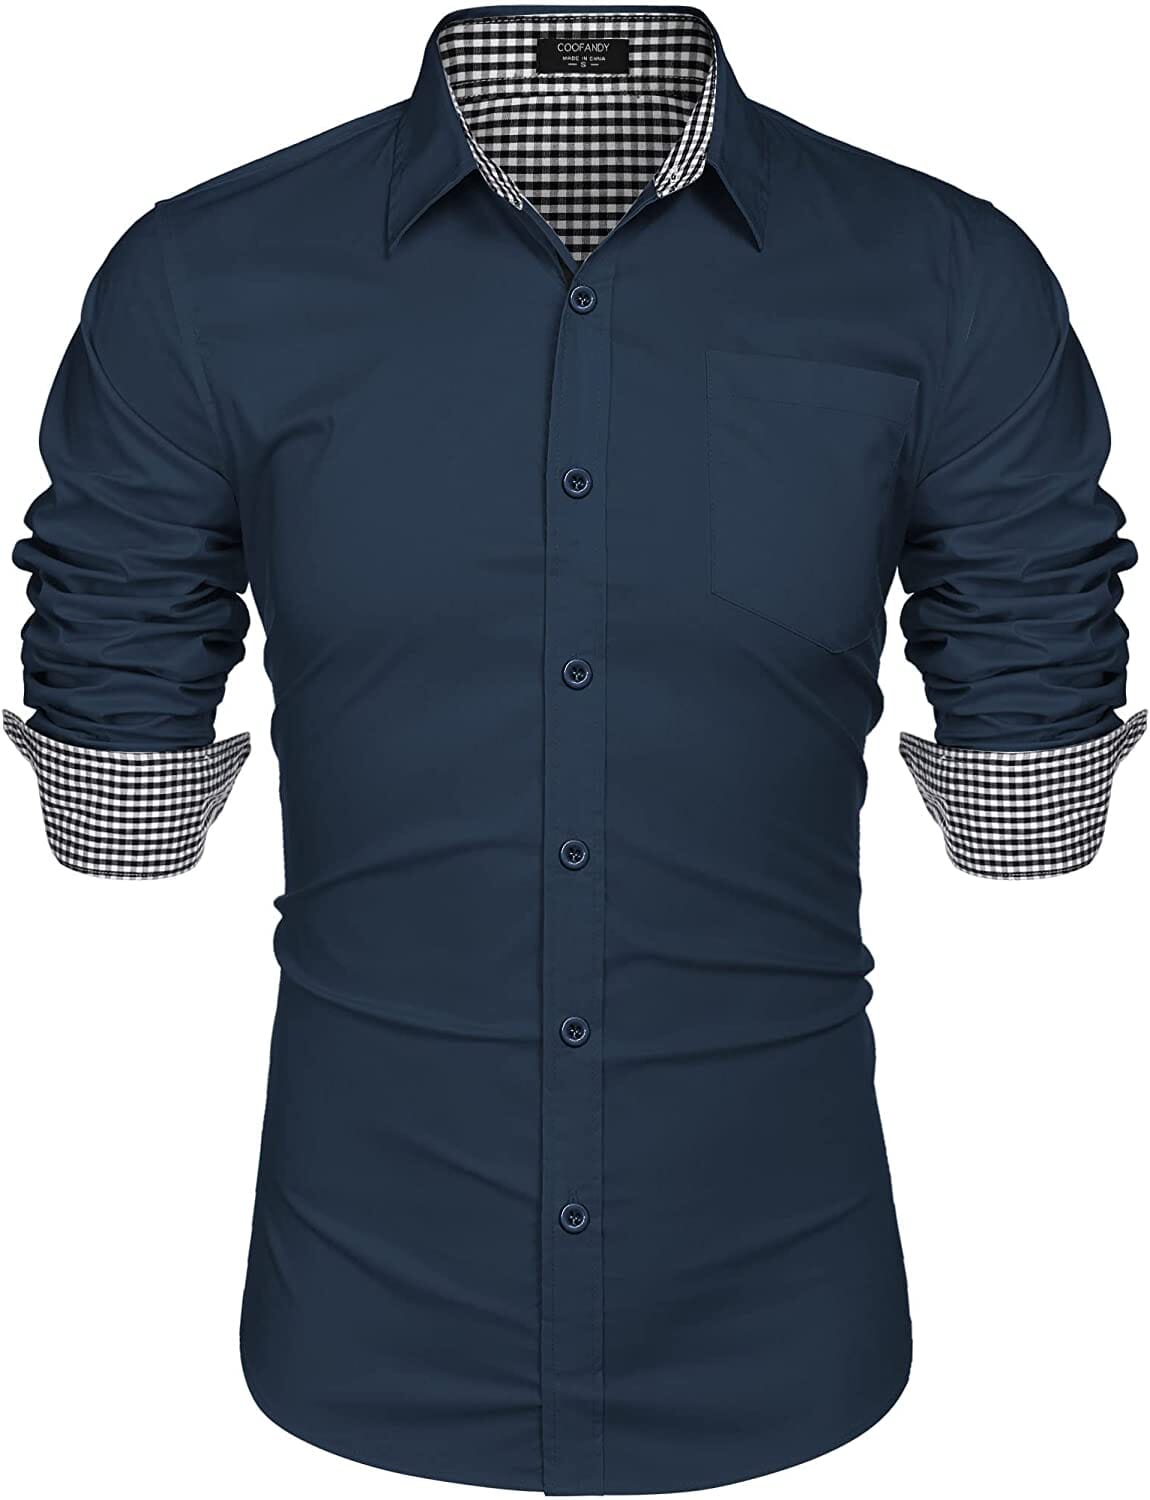 Fashion Business Cotton Dress Shirt (US Only) Shirts COOFANDY Store Navy Blue S 